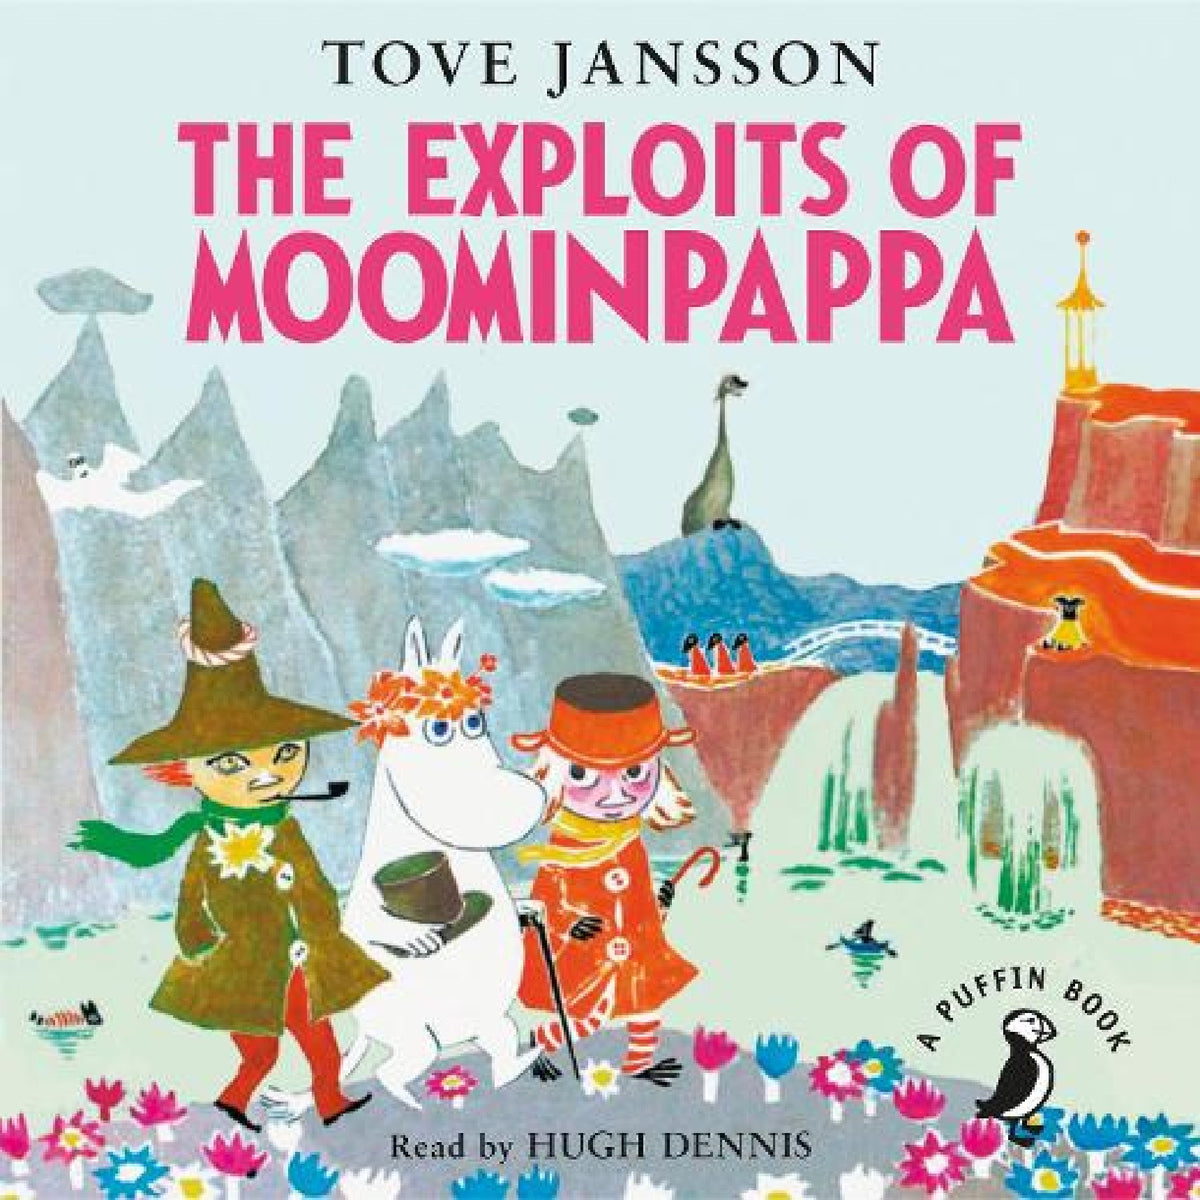 Audio Book The Exploits of Moominpappa read by Hugh Dennis